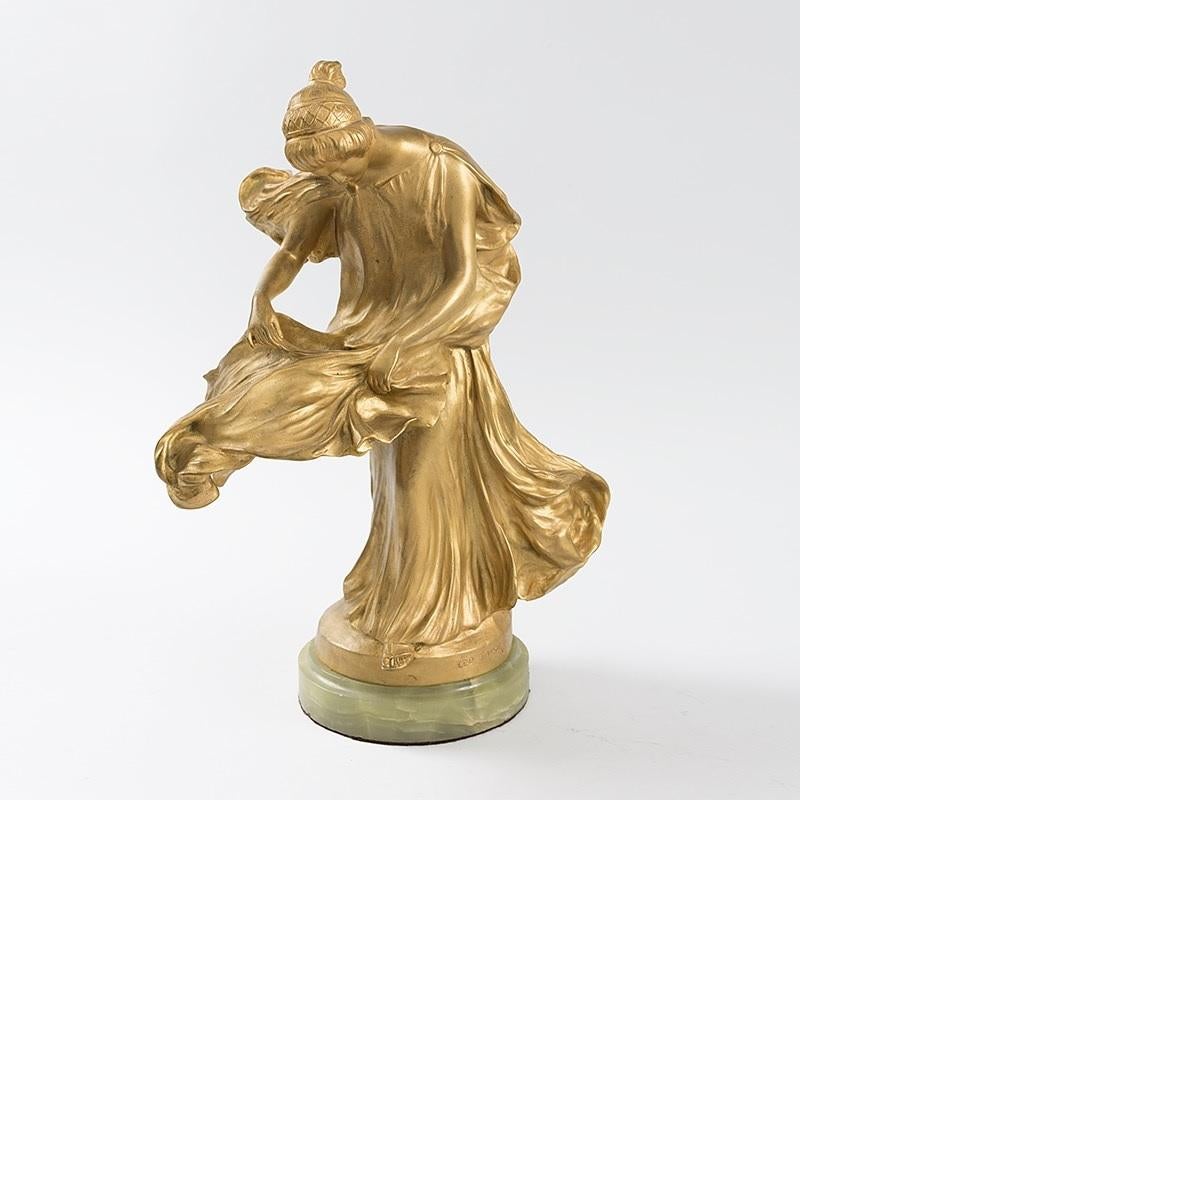 A French Art Nouveau gilt bronze figural lamp by Leo Laporte-Blairsy. The lamp depicts a classically draped female raised on a circular onyx base. Her lifted skirt creating the shade, Circa 1900.

Provenance: Mr. Kenneth W. Davis, Fort Worth,